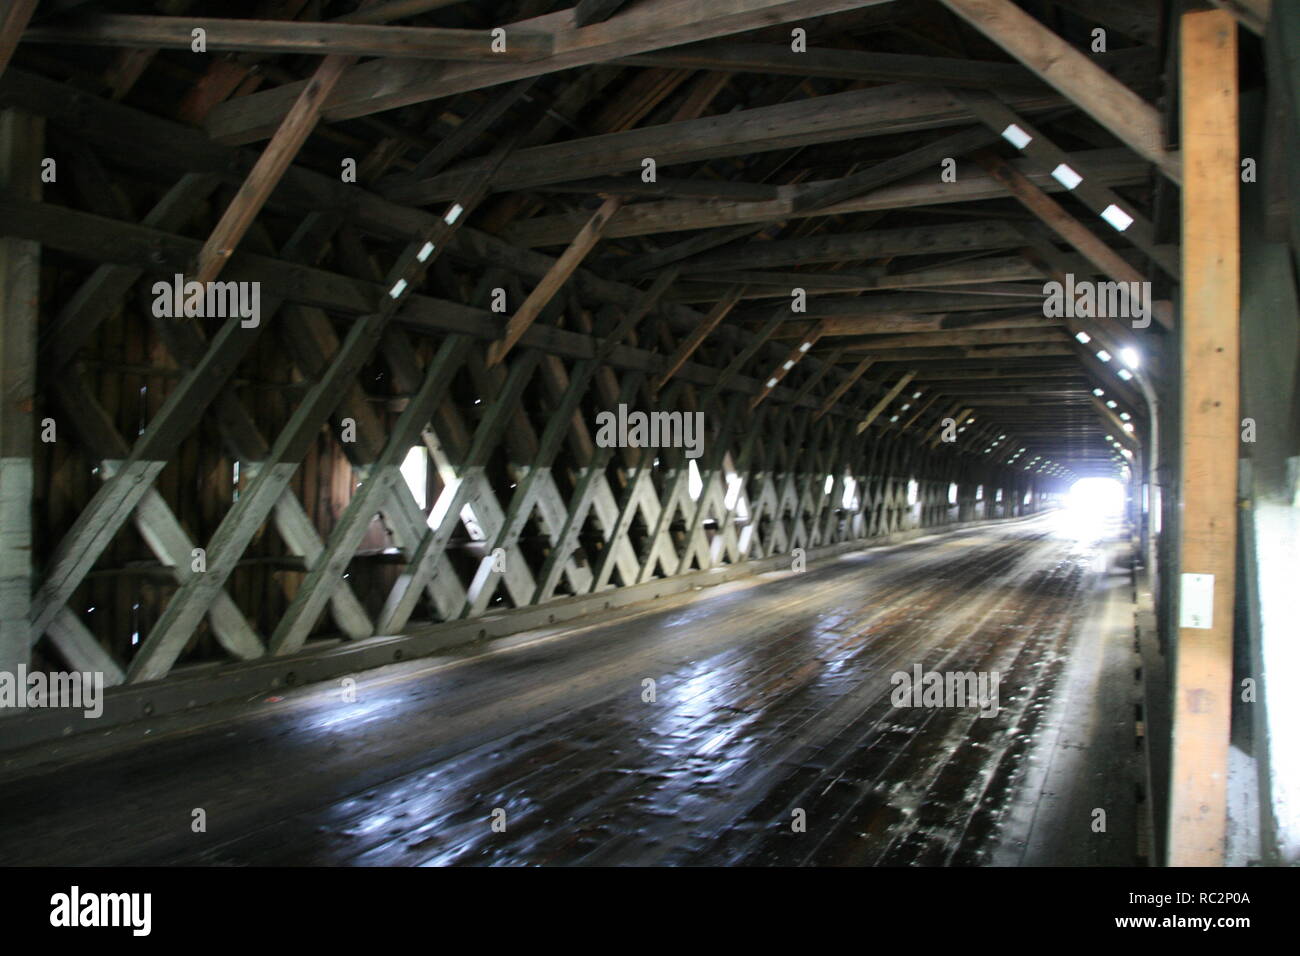 Interior view of Cornish Windsor Covered Bridge (New Hampshire/ Vermont ) showing detailed wooden frame construction & car headlights in distance Stock Photo